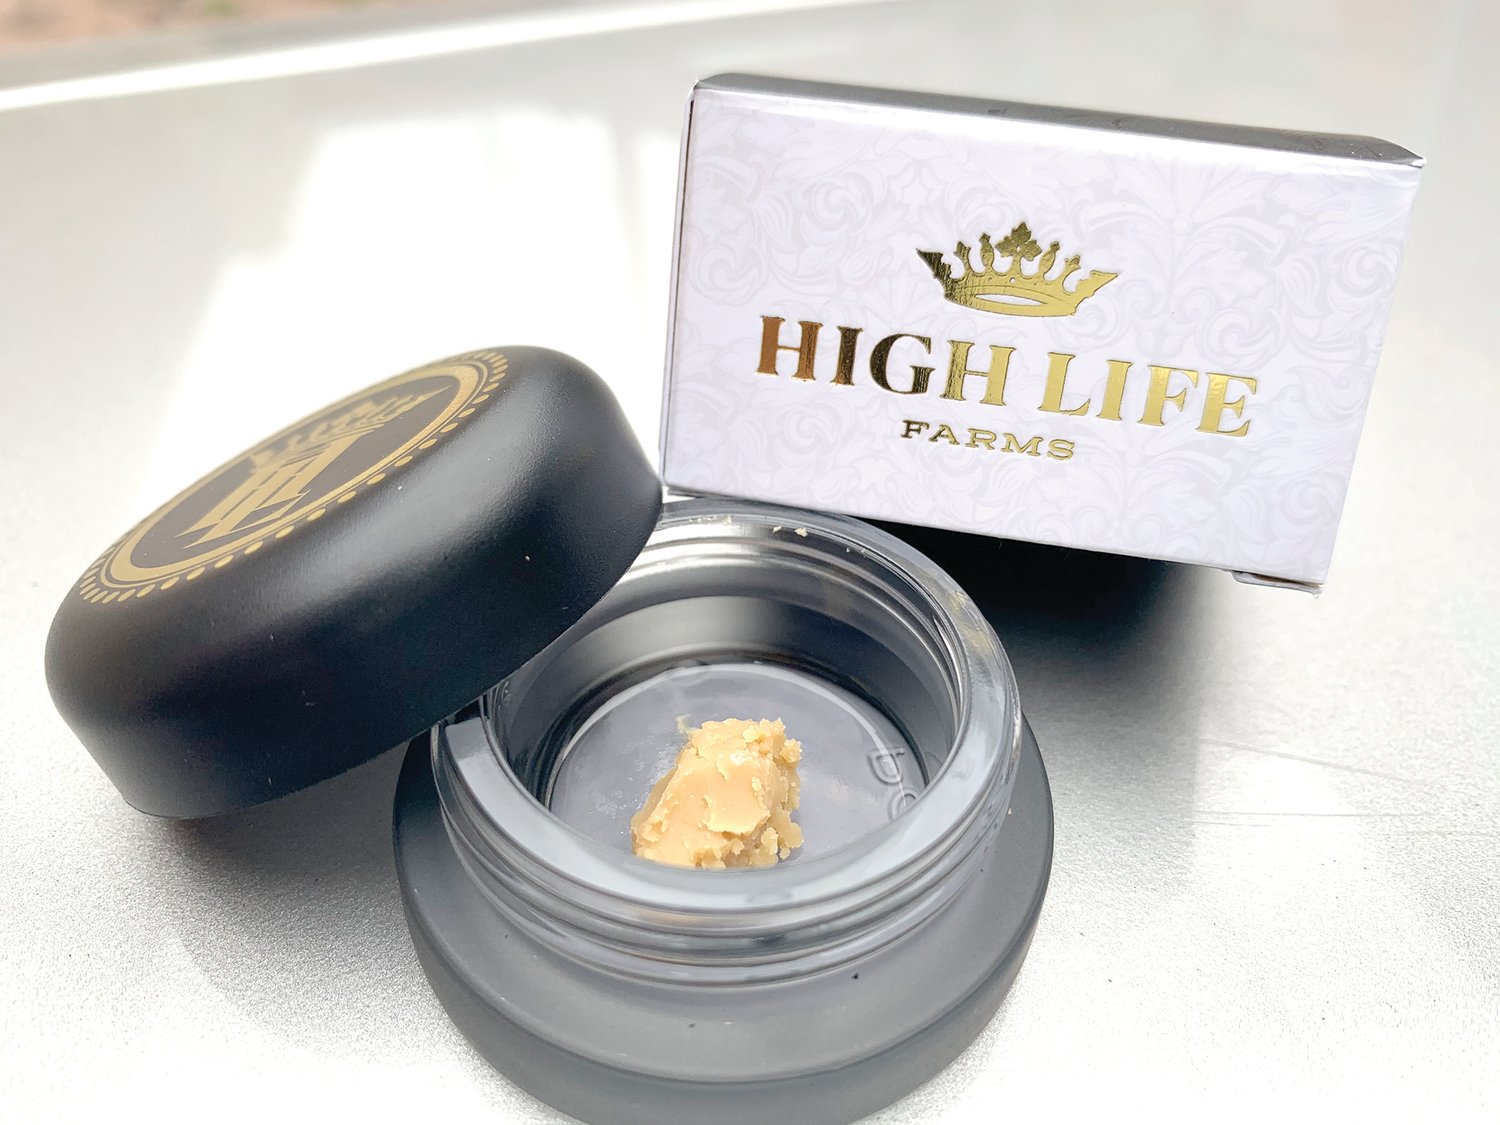 Live hash rosin from High Life Farms.